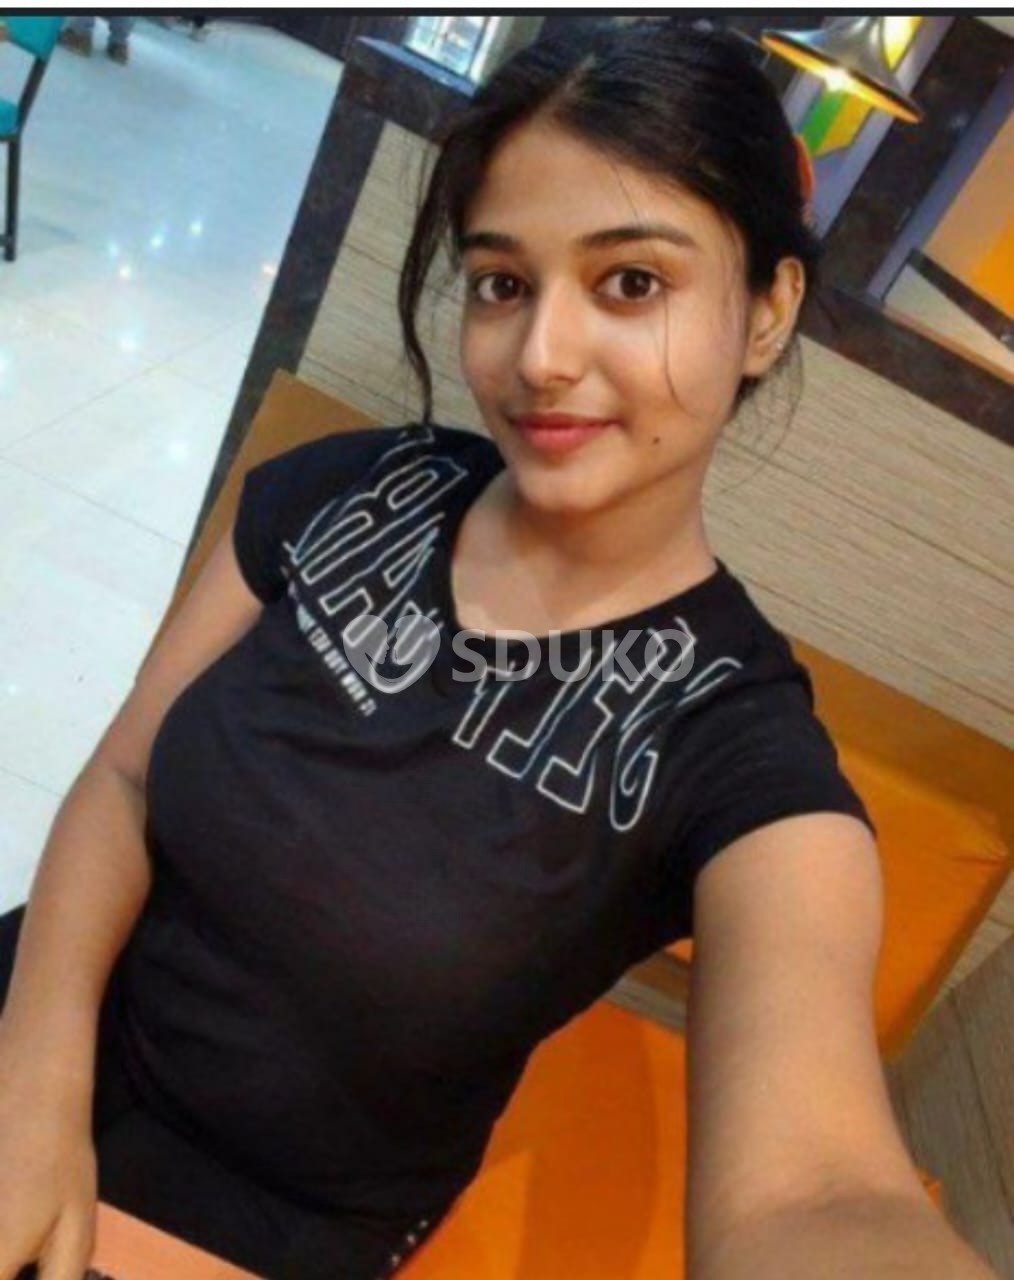 Guntur..💙🔥MY SELF DIVYA UNLIMITED SEX CUTE BEST SERVICE AND 24 HR AVAILABLE